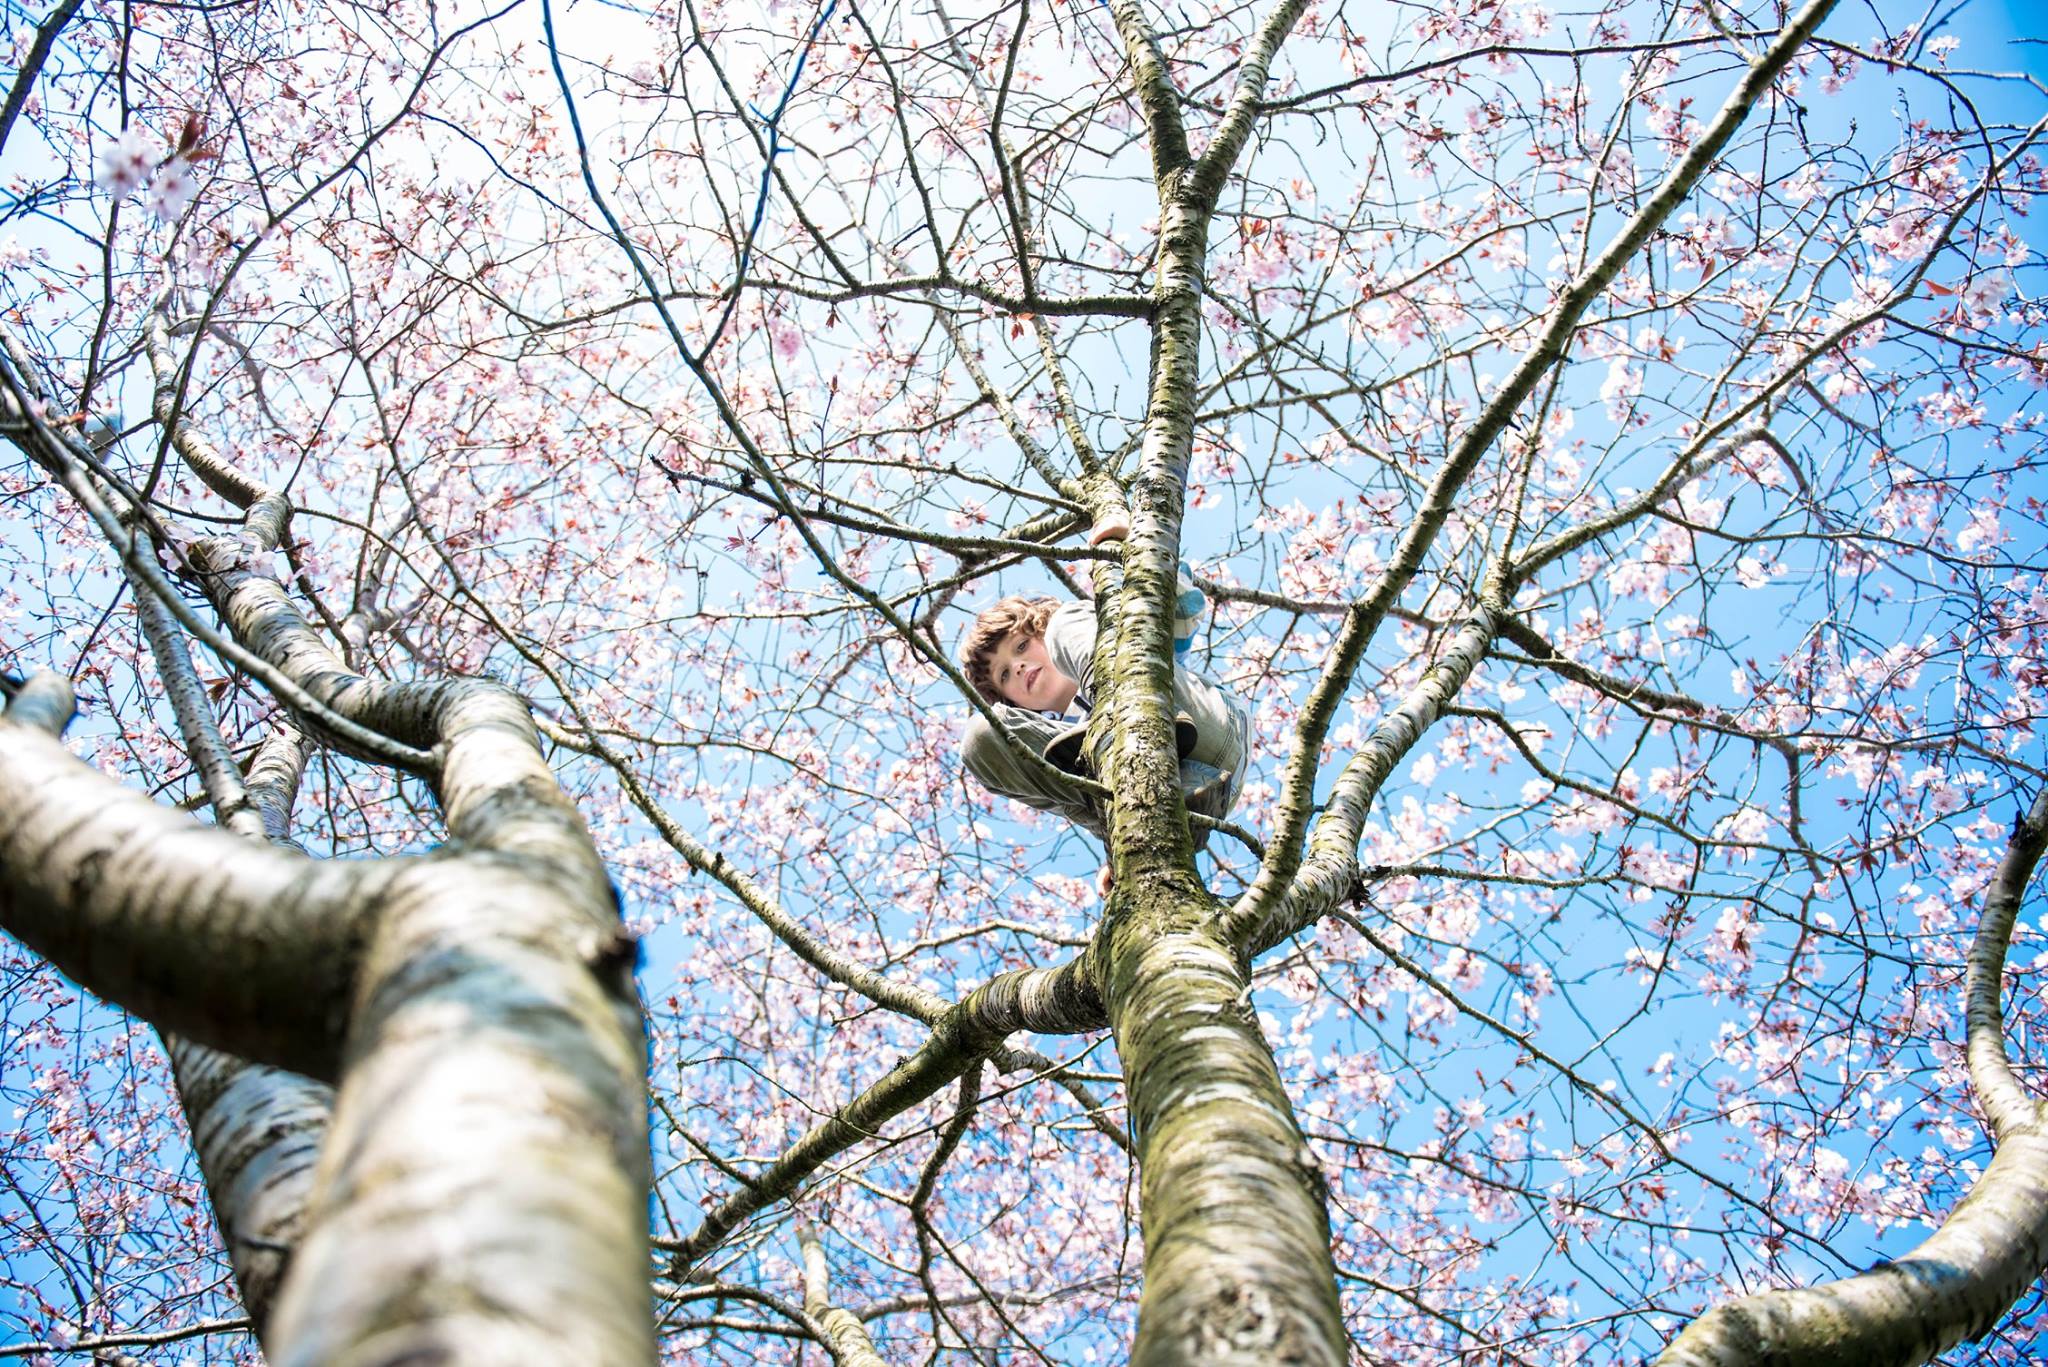 young boy sitting in a blossom tree